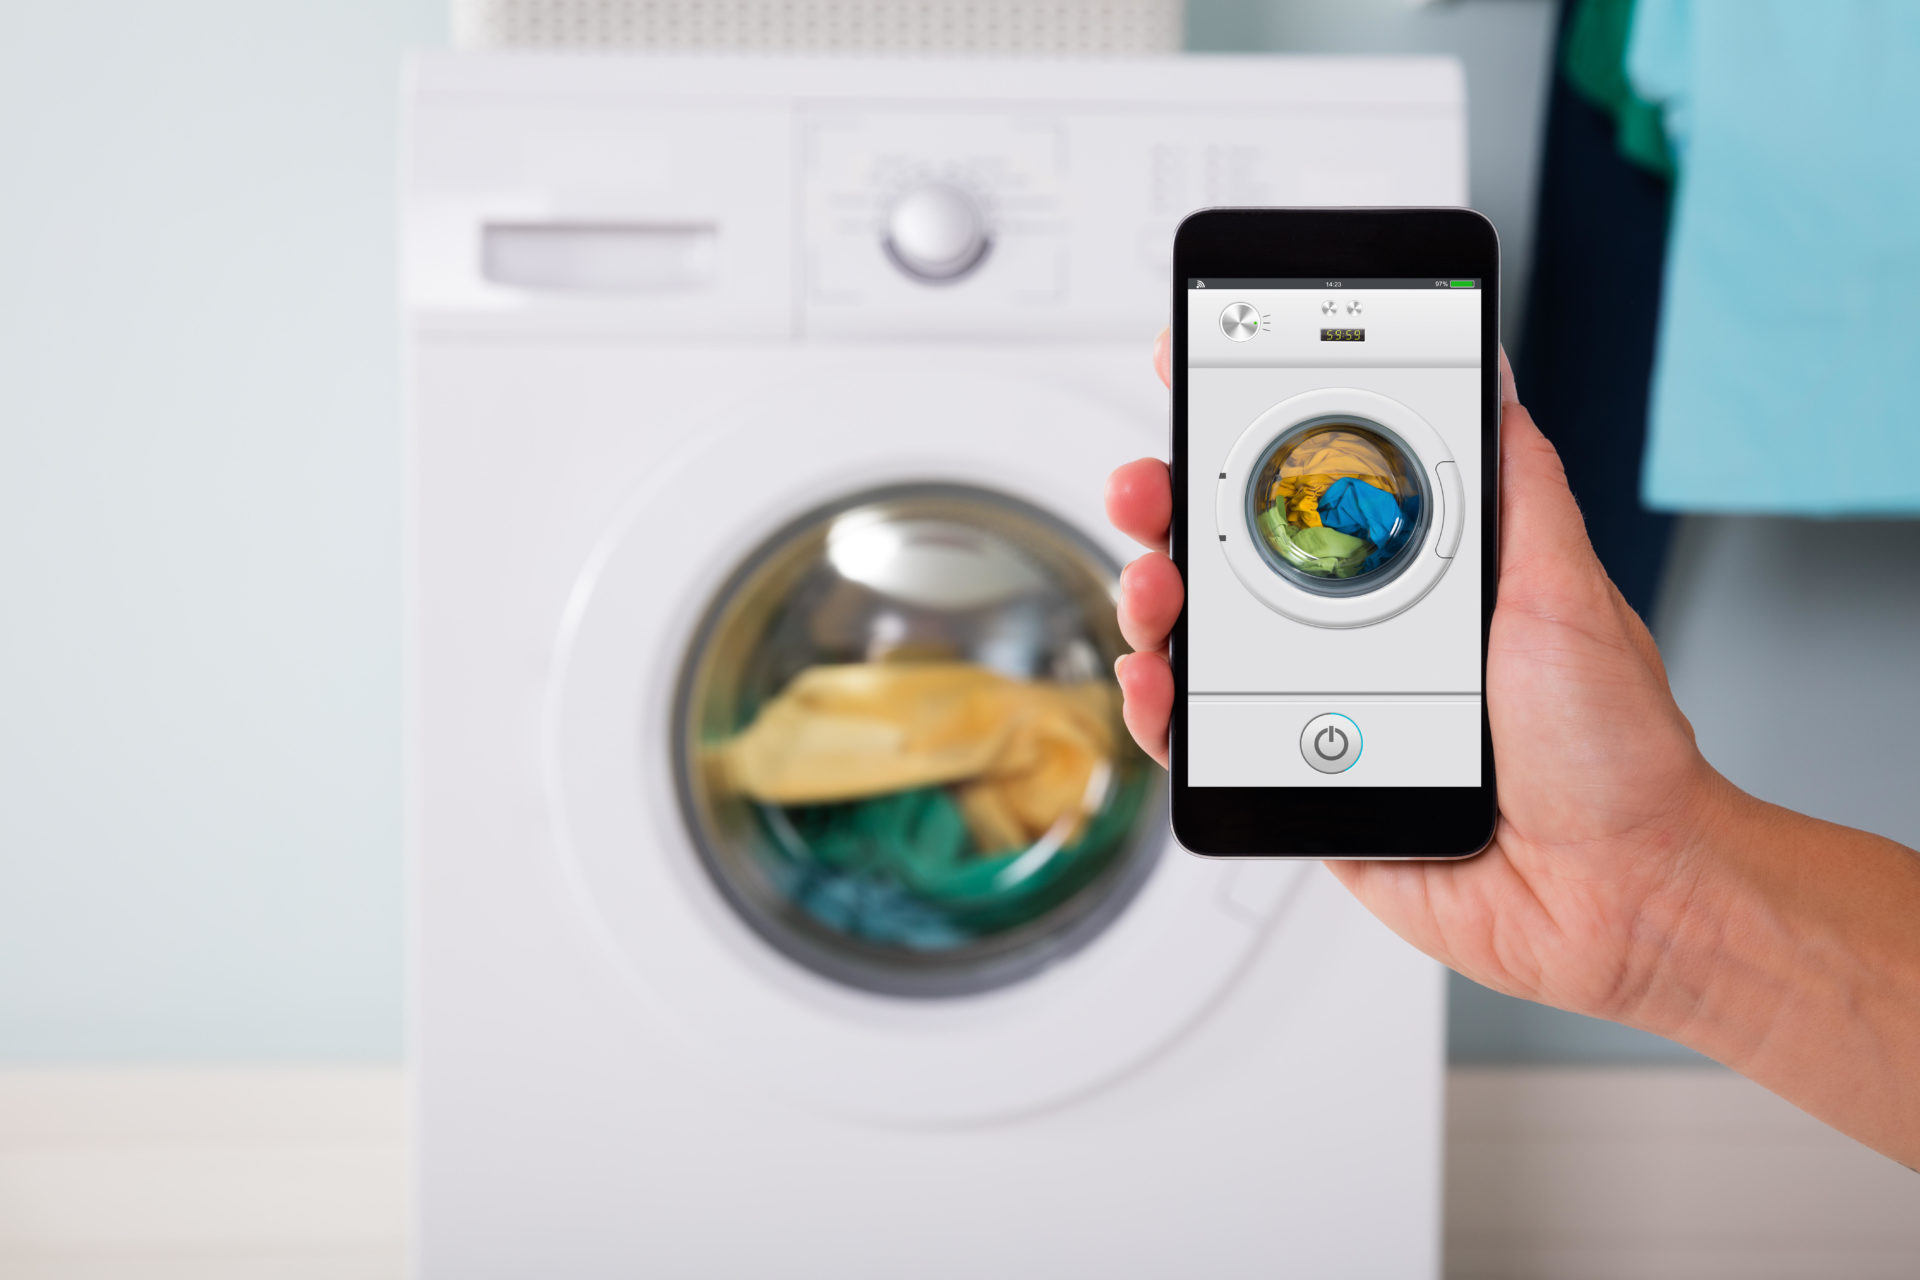 Close-up of person hand operating smart washing machine using mobile phone app. Image: Andriy Popov / Alamy Stock Photo 